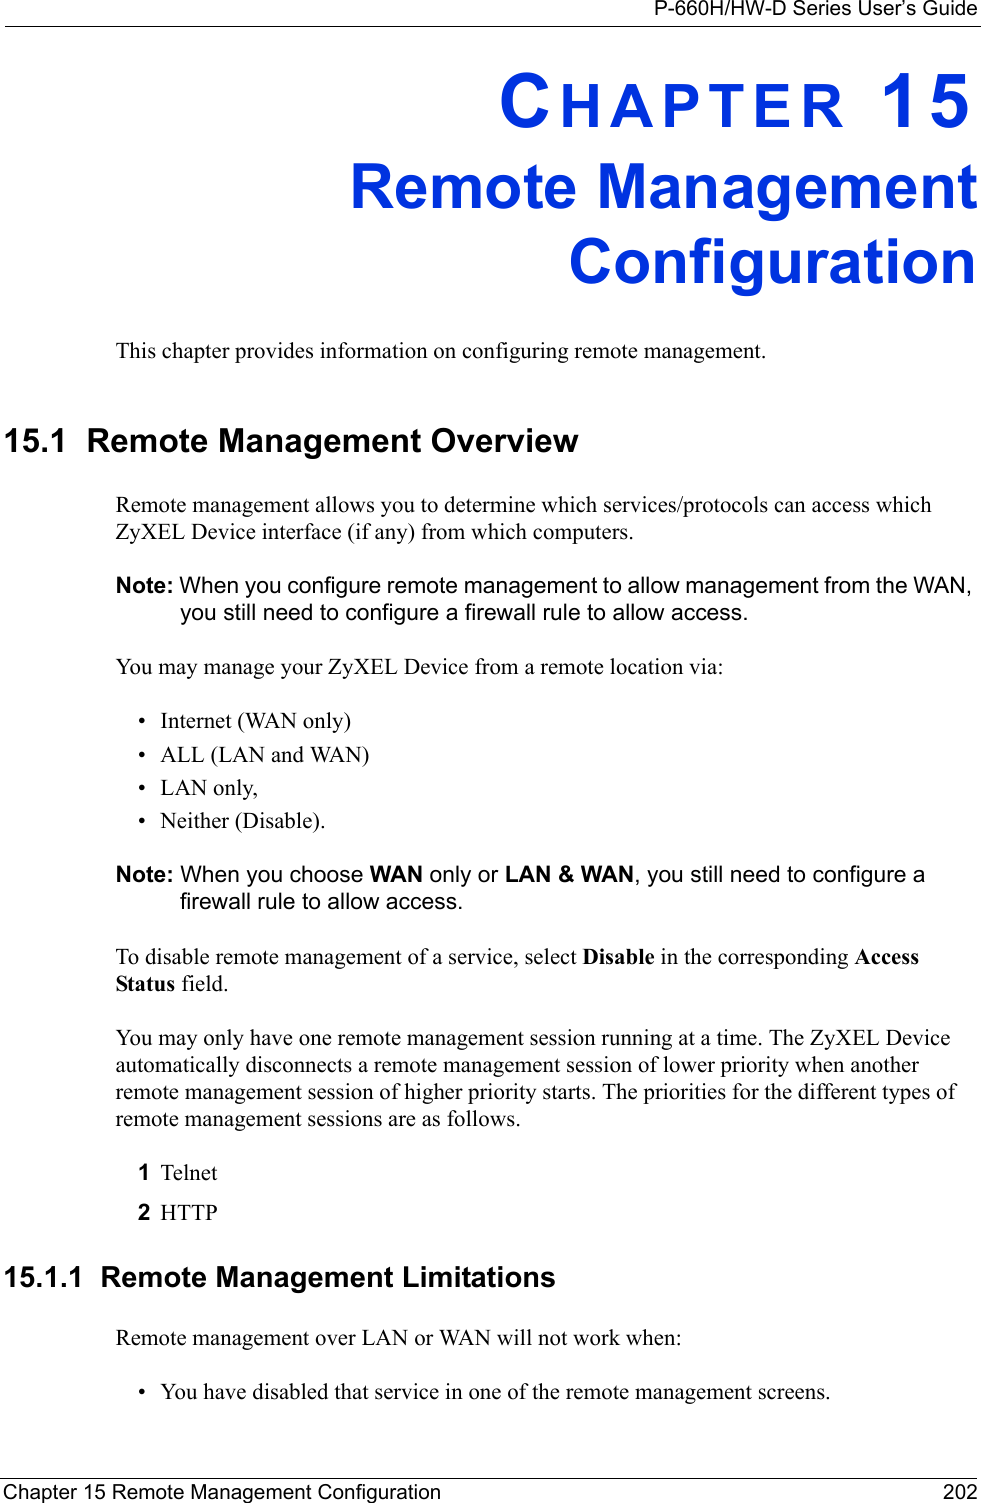 P-660H/HW-D Series User’s GuideChapter 15 Remote Management Configuration 202CHAPTER 15Remote ManagementConfigurationThis chapter provides information on configuring remote management.15.1  Remote Management Overview Remote management allows you to determine which services/protocols can access which ZyXEL Device interface (if any) from which computers.Note: When you configure remote management to allow management from the WAN, you still need to configure a firewall rule to allow access.You may manage your ZyXEL Device from a remote location via:• Internet (WAN only)• ALL (LAN and WAN)• LAN only, • Neither (Disable).Note: When you choose WAN only or LAN &amp; WAN, you still need to configure a firewall rule to allow access.To disable remote management of a service, select Disable in the corresponding Access Status field.You may only have one remote management session running at a time. The ZyXEL Device automatically disconnects a remote management session of lower priority when another remote management session of higher priority starts. The priorities for the different types of remote management sessions are as follows.1Telnet2HTTP15.1.1  Remote Management LimitationsRemote management over LAN or WAN will not work when:• You have disabled that service in one of the remote management screens.